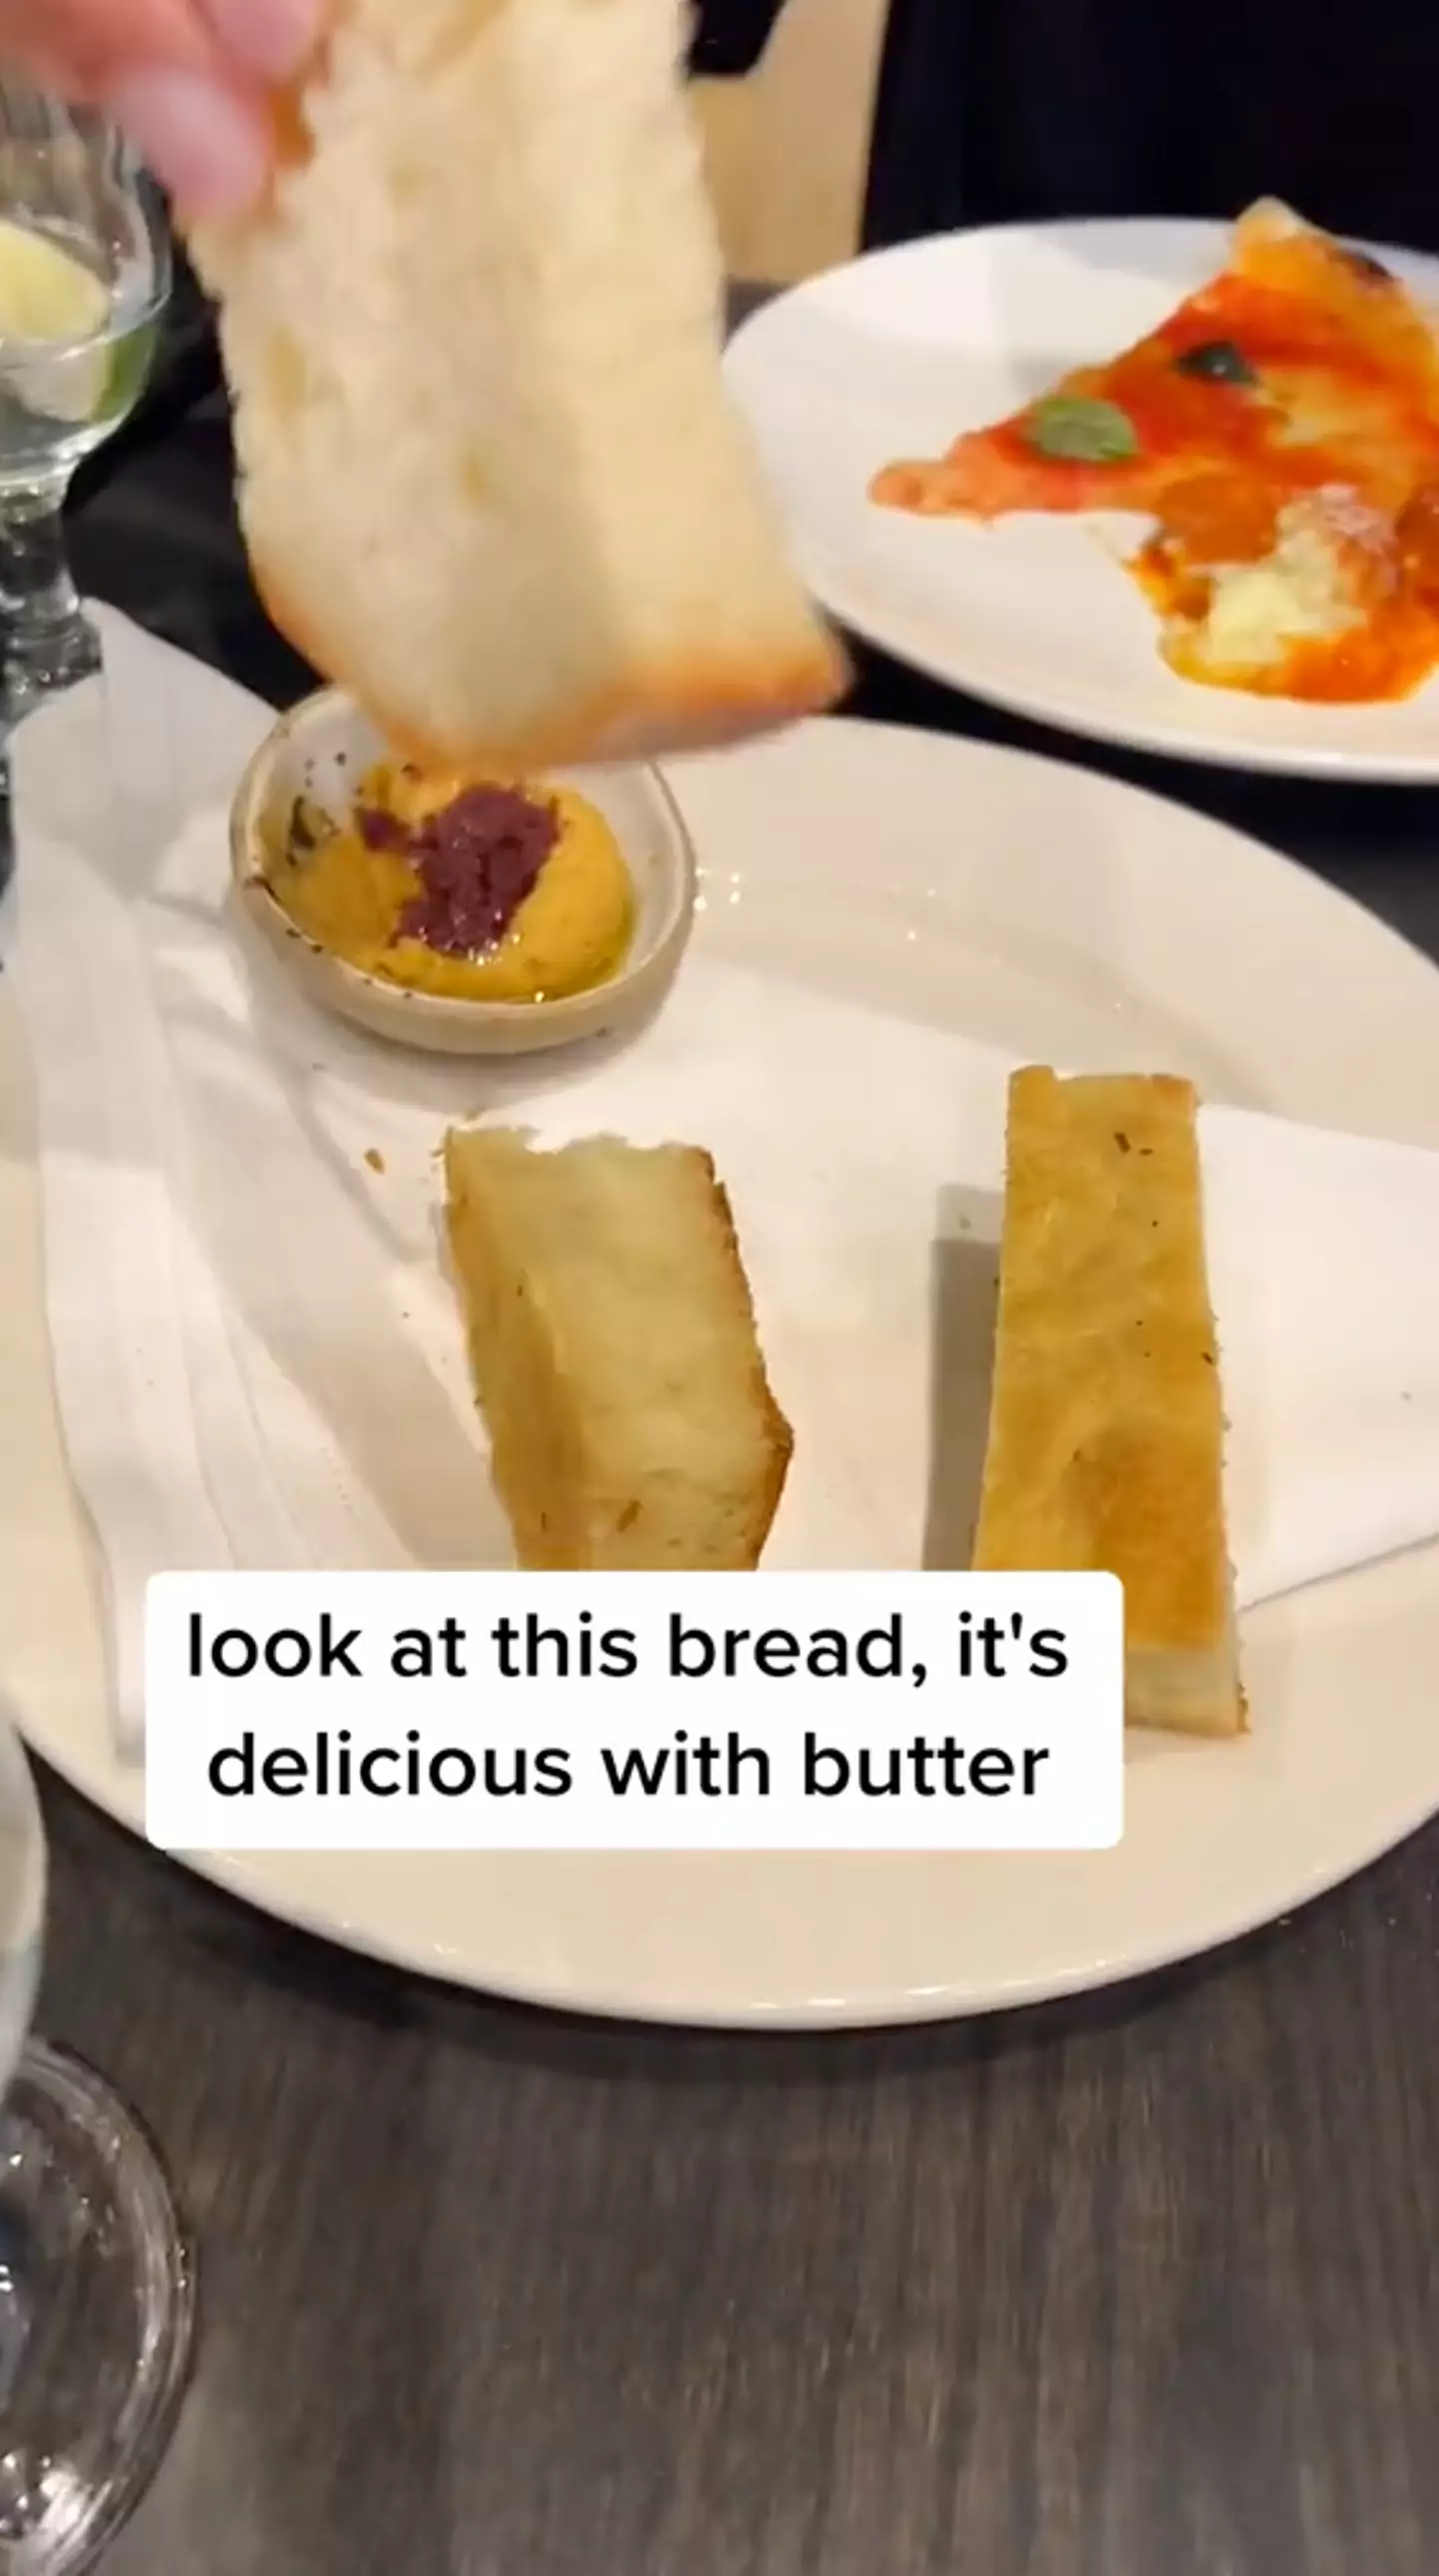 A TikToker has shared why some restaurants are keen on pushing their bread out to customers.